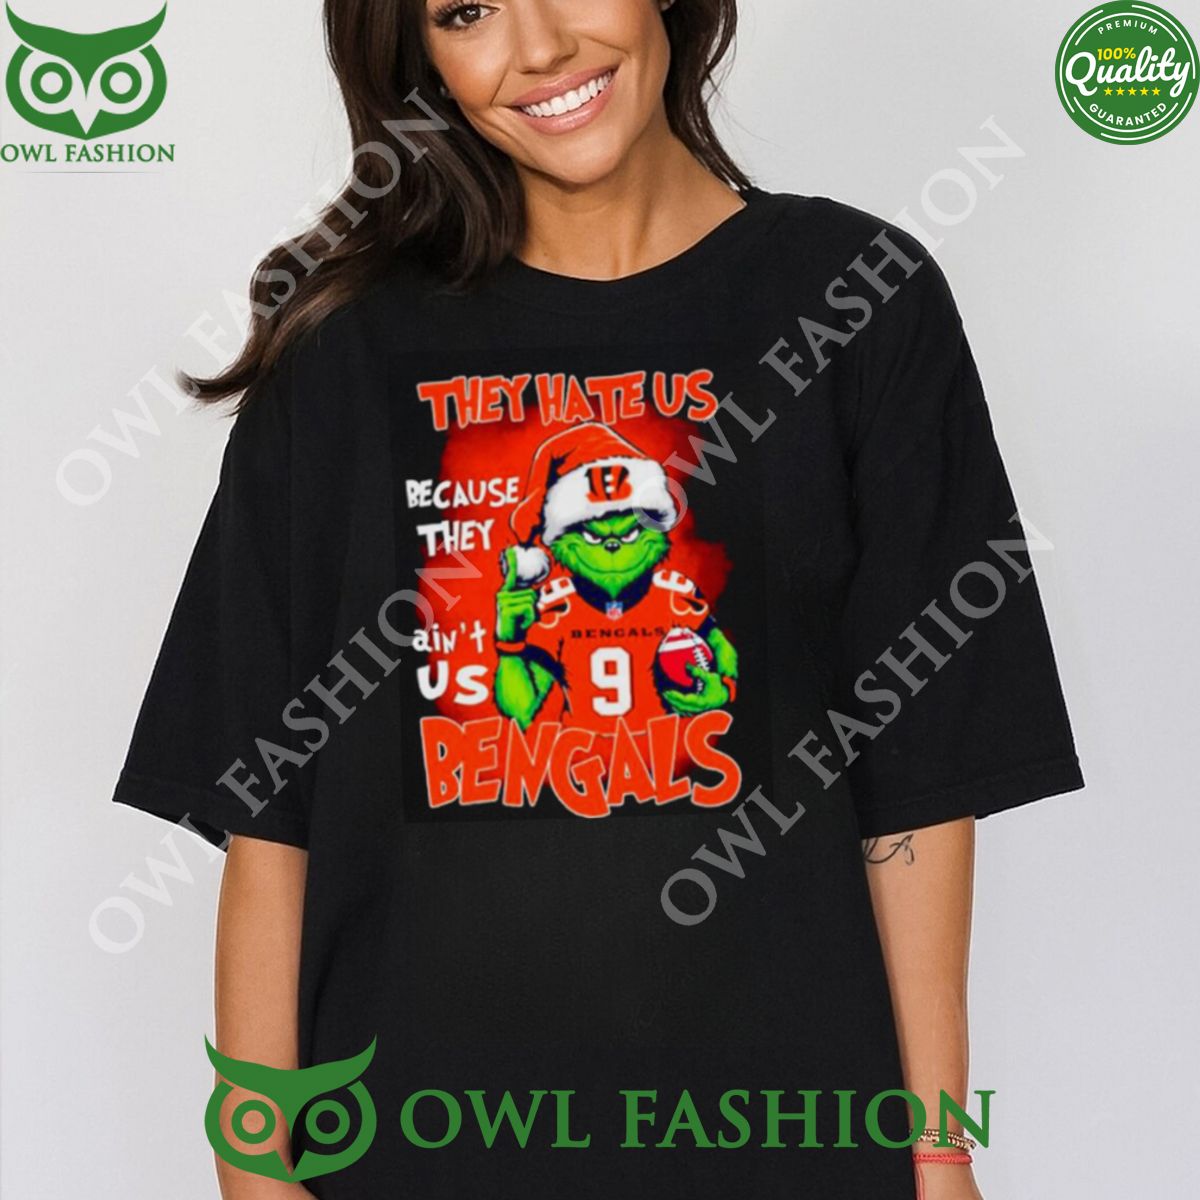 santa grinch they hate us because they aint us bengals tshirt 1 ae99o.jpg